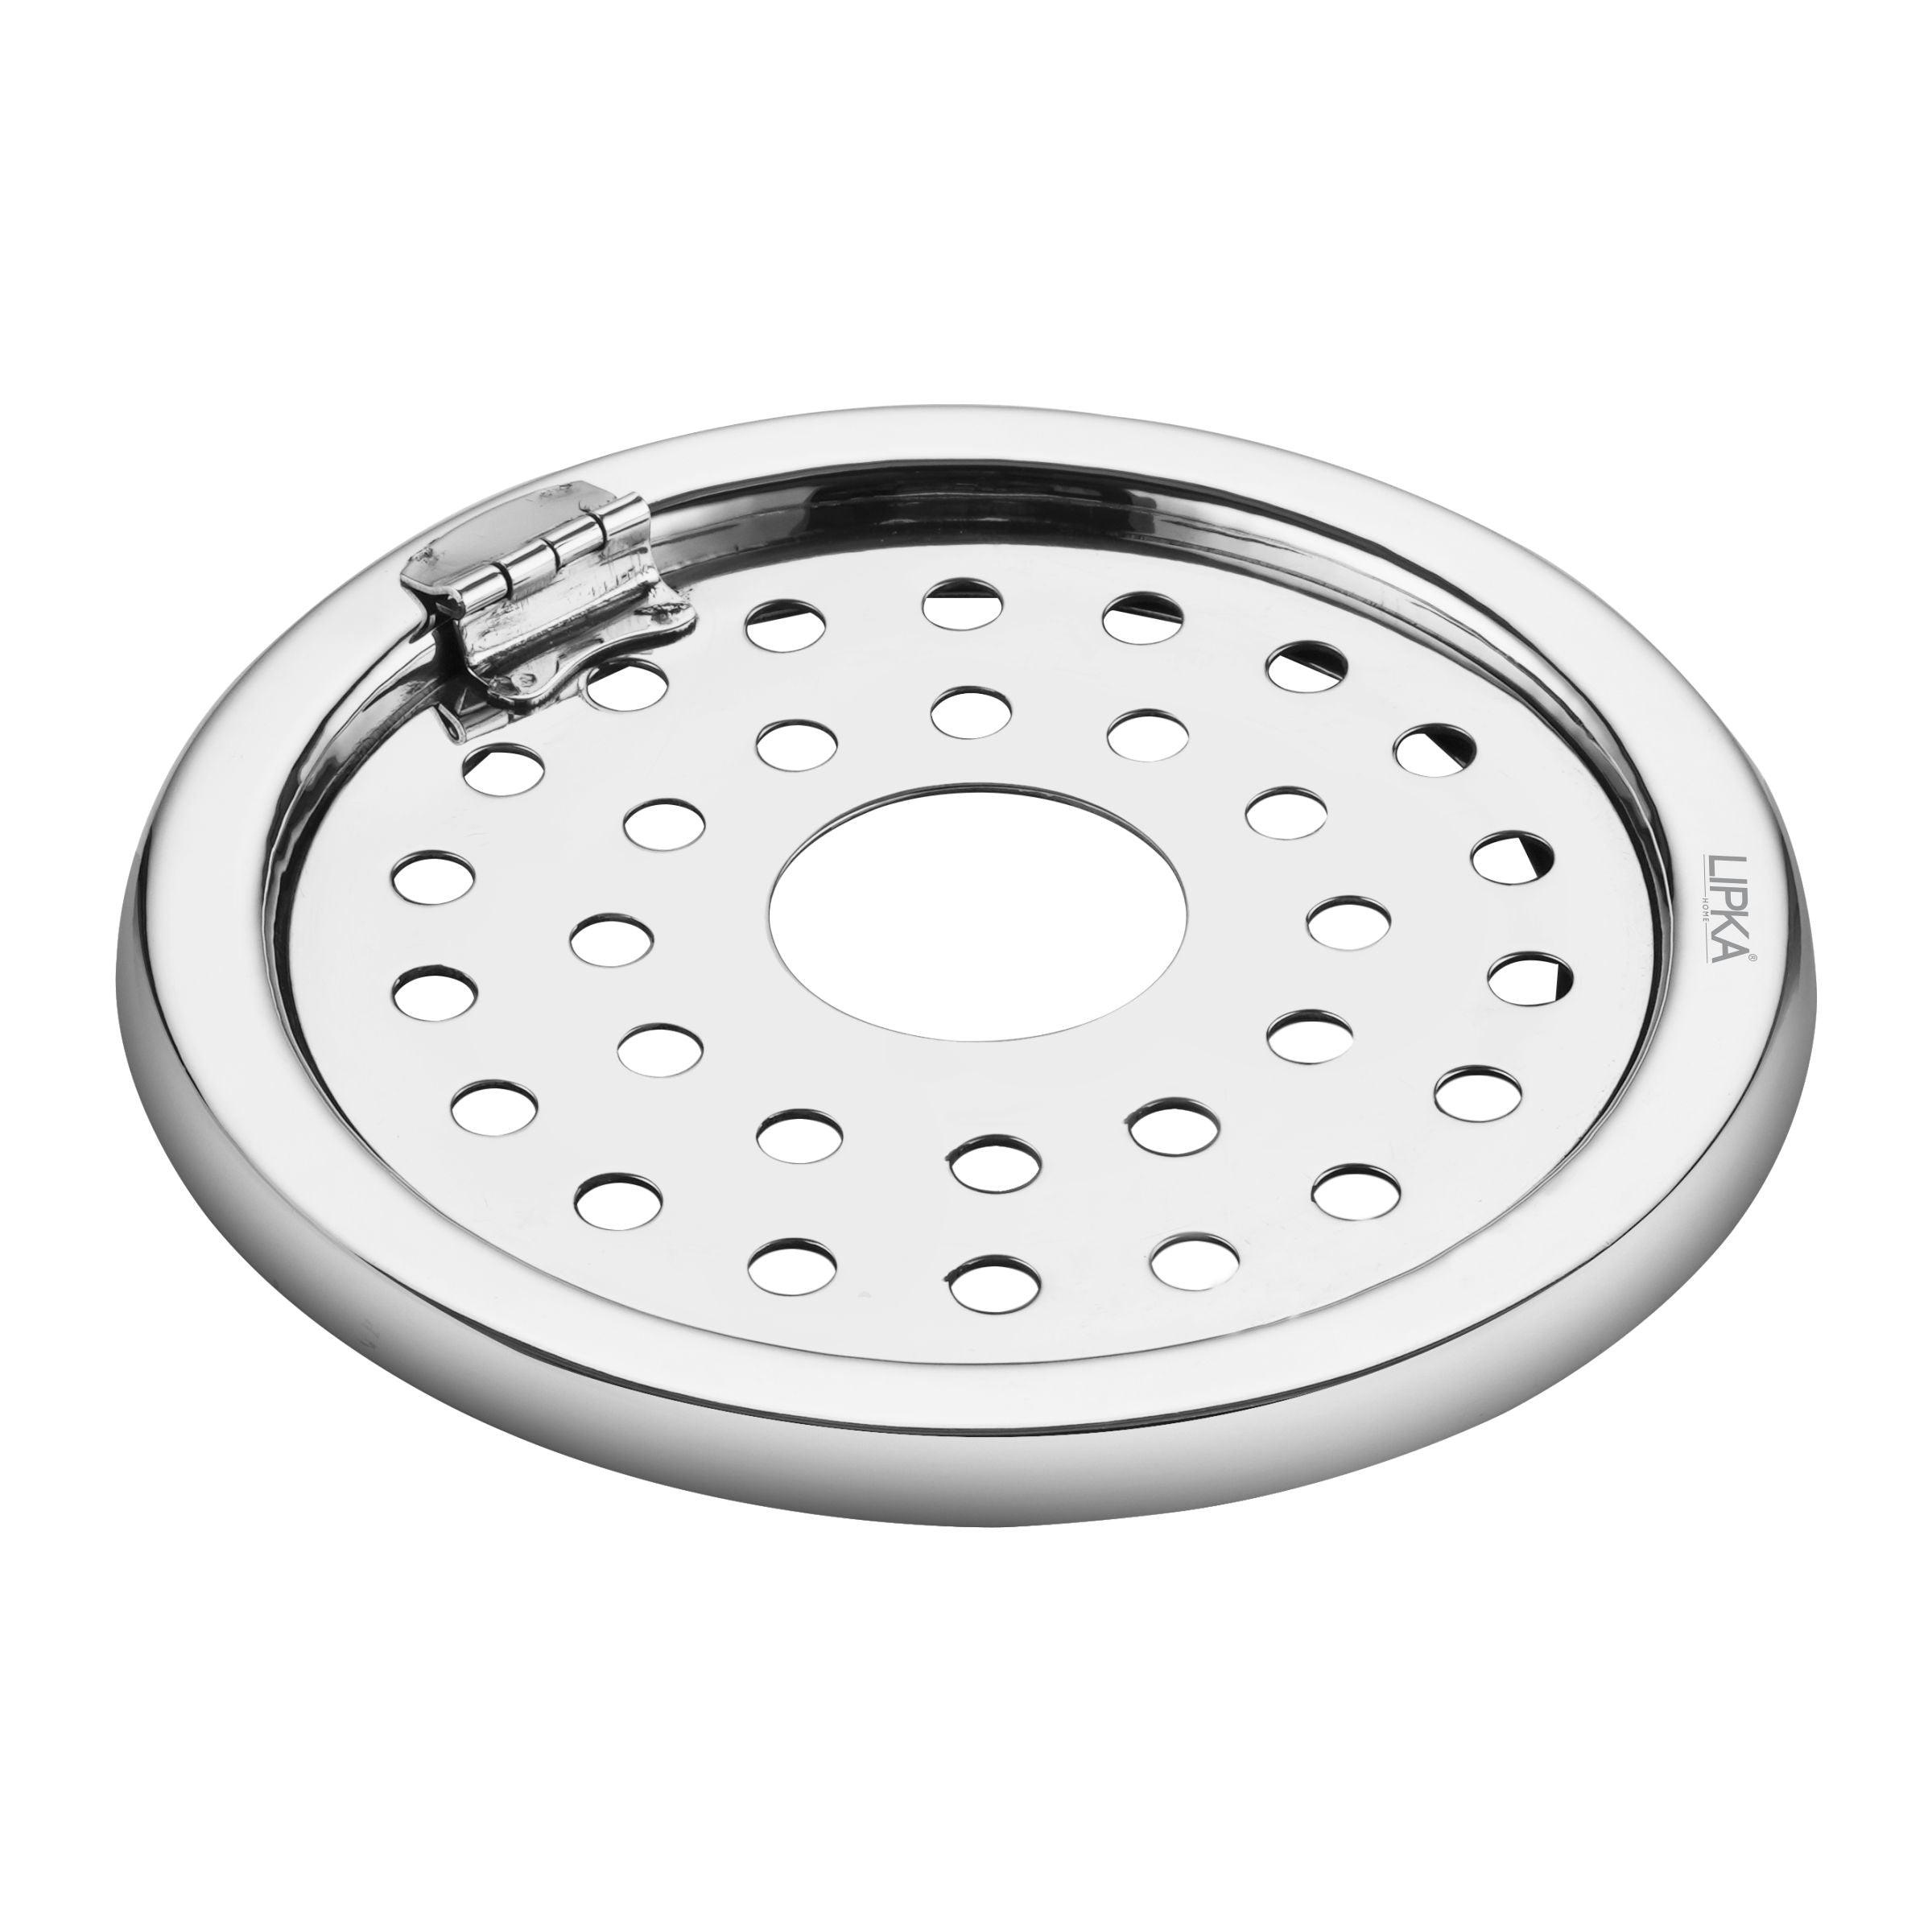 Eon Round Floor Drain with Plain Jali, Hinge & Hole (5 inches)